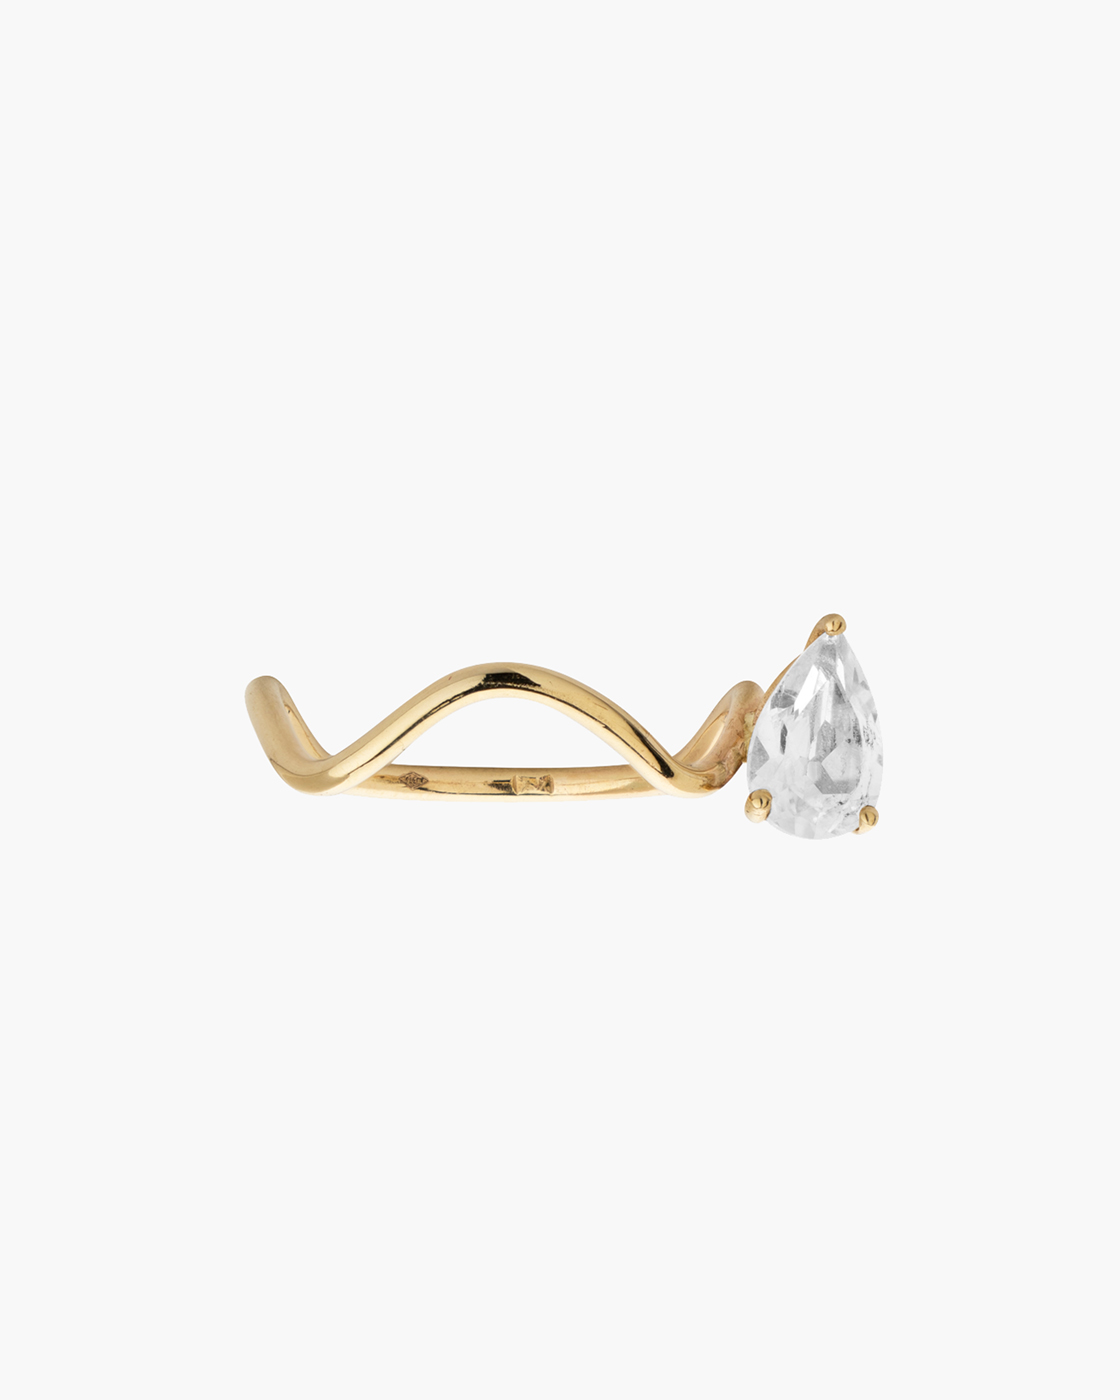 Petite Comete Yellow Gold Ring with a White Topaz